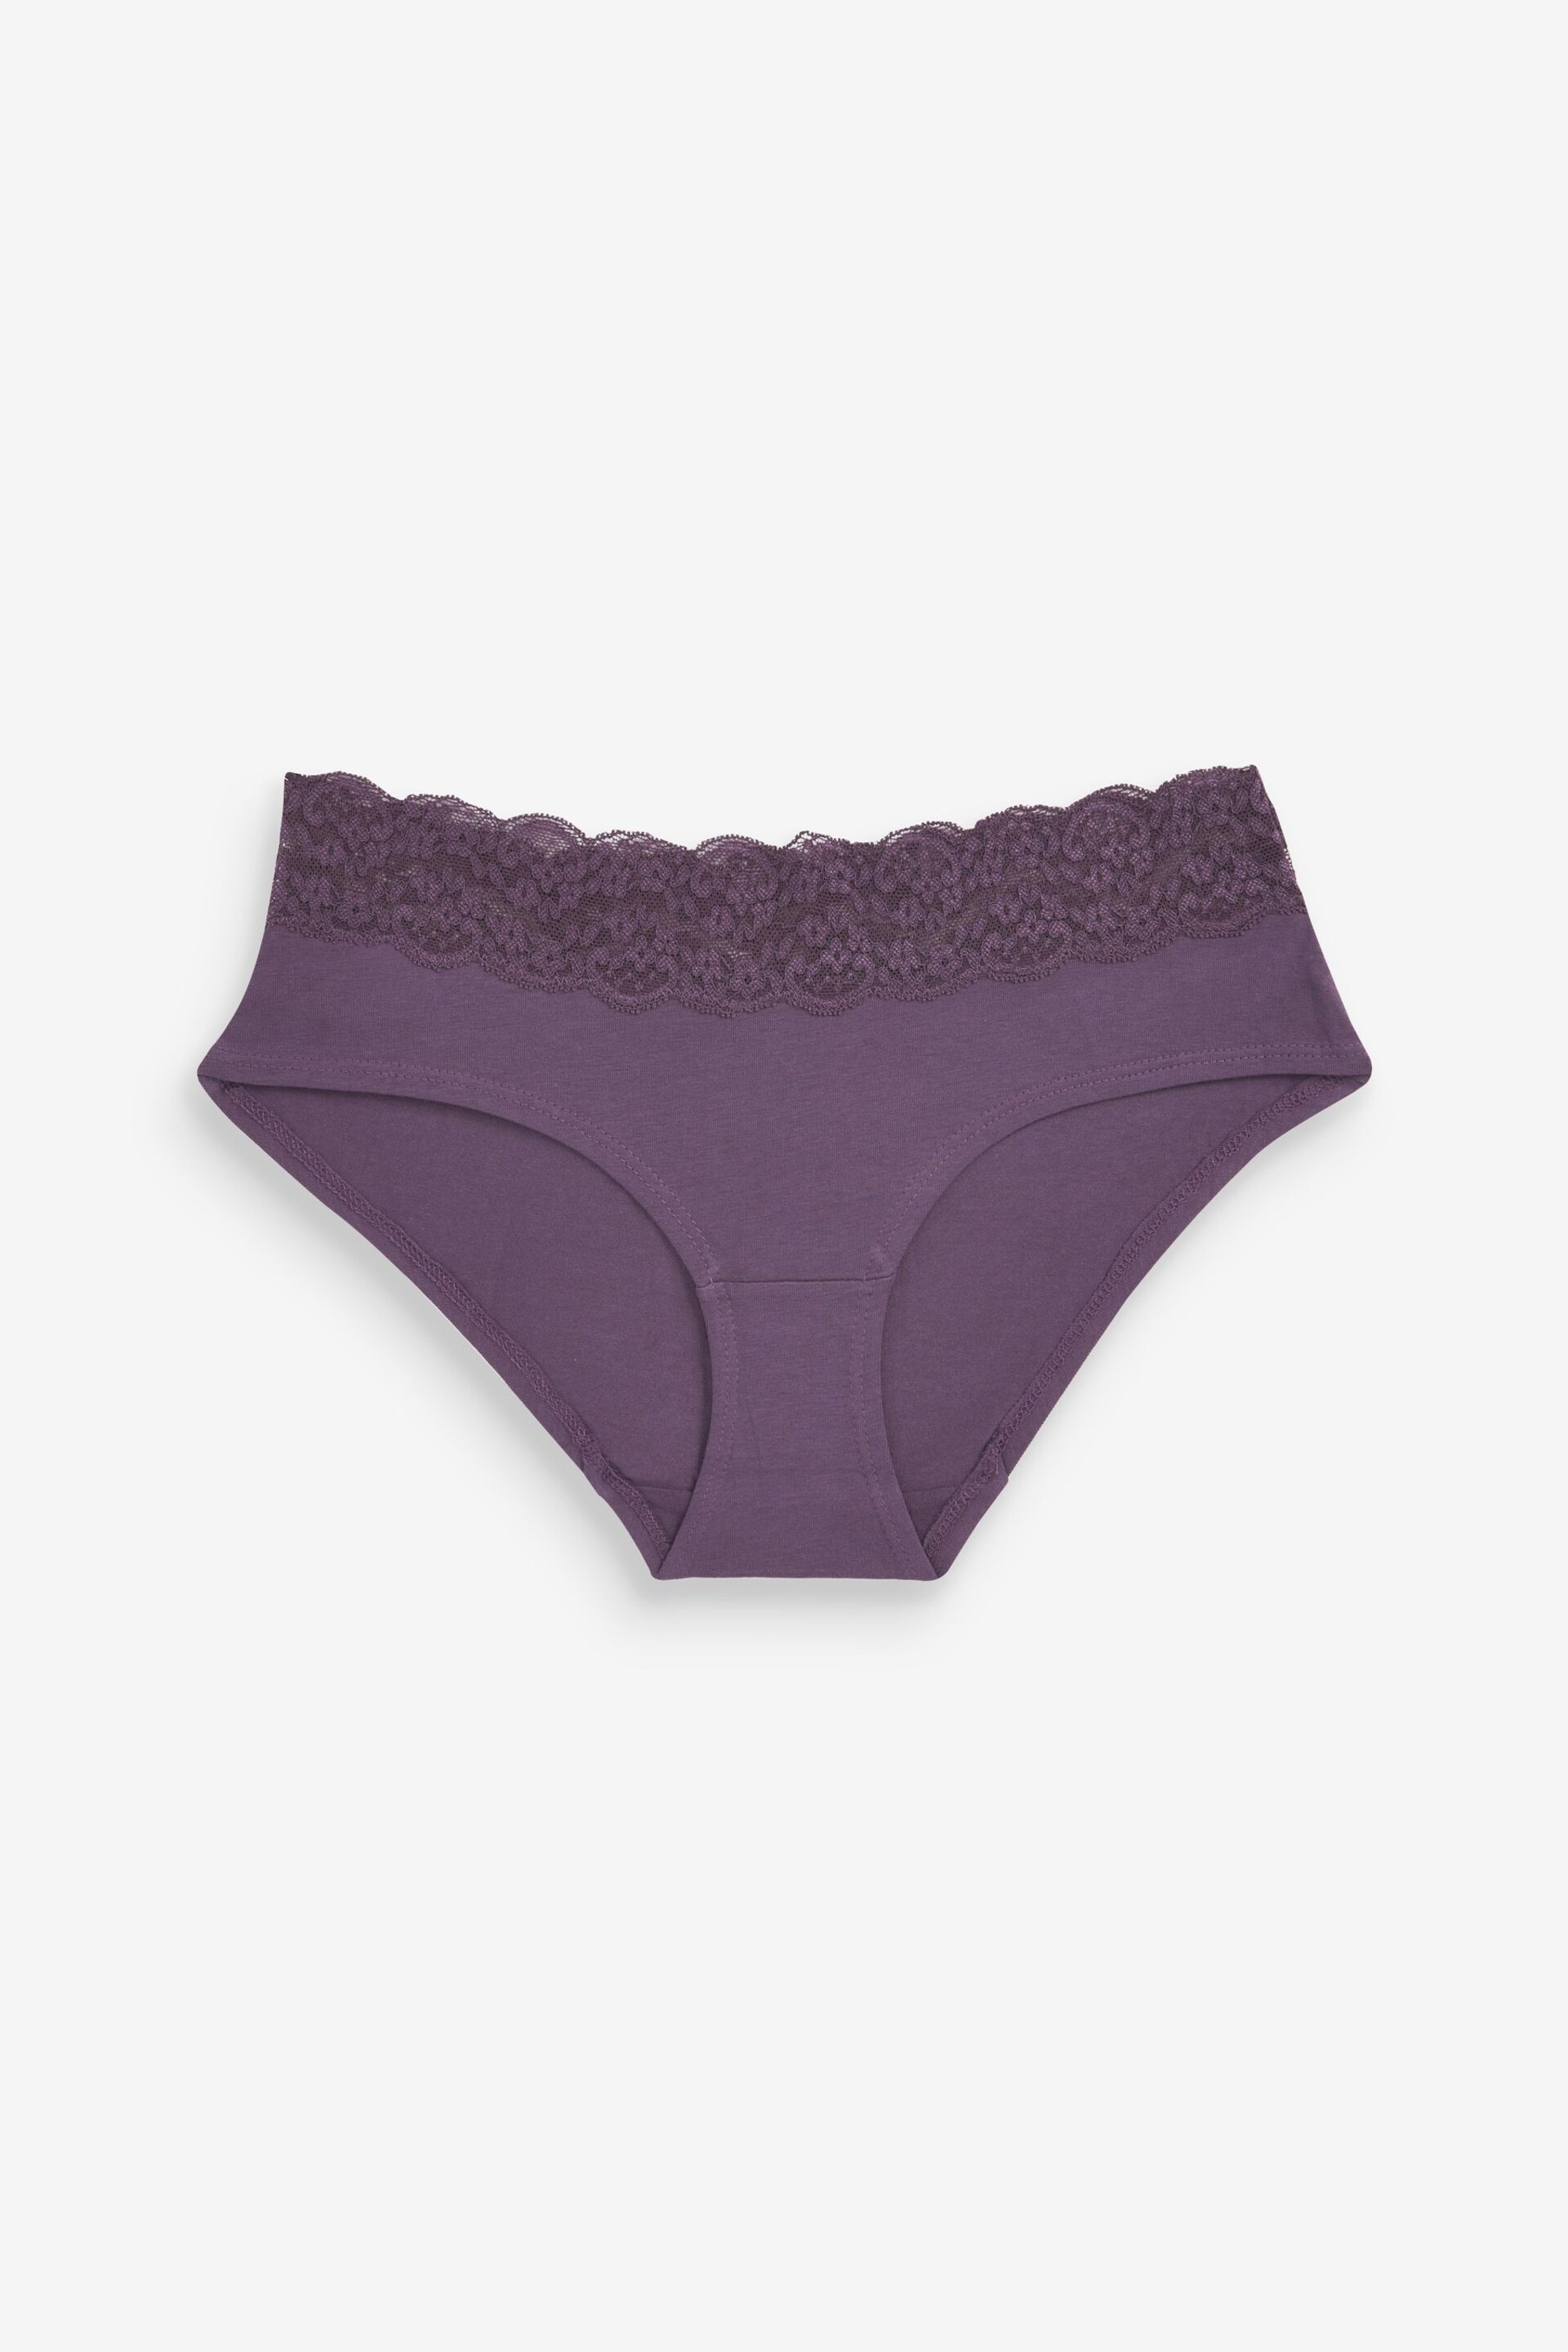 Pink/Purple/Cream Short Cotton and Lace Knickers 4 Pack - Image 4 of 9